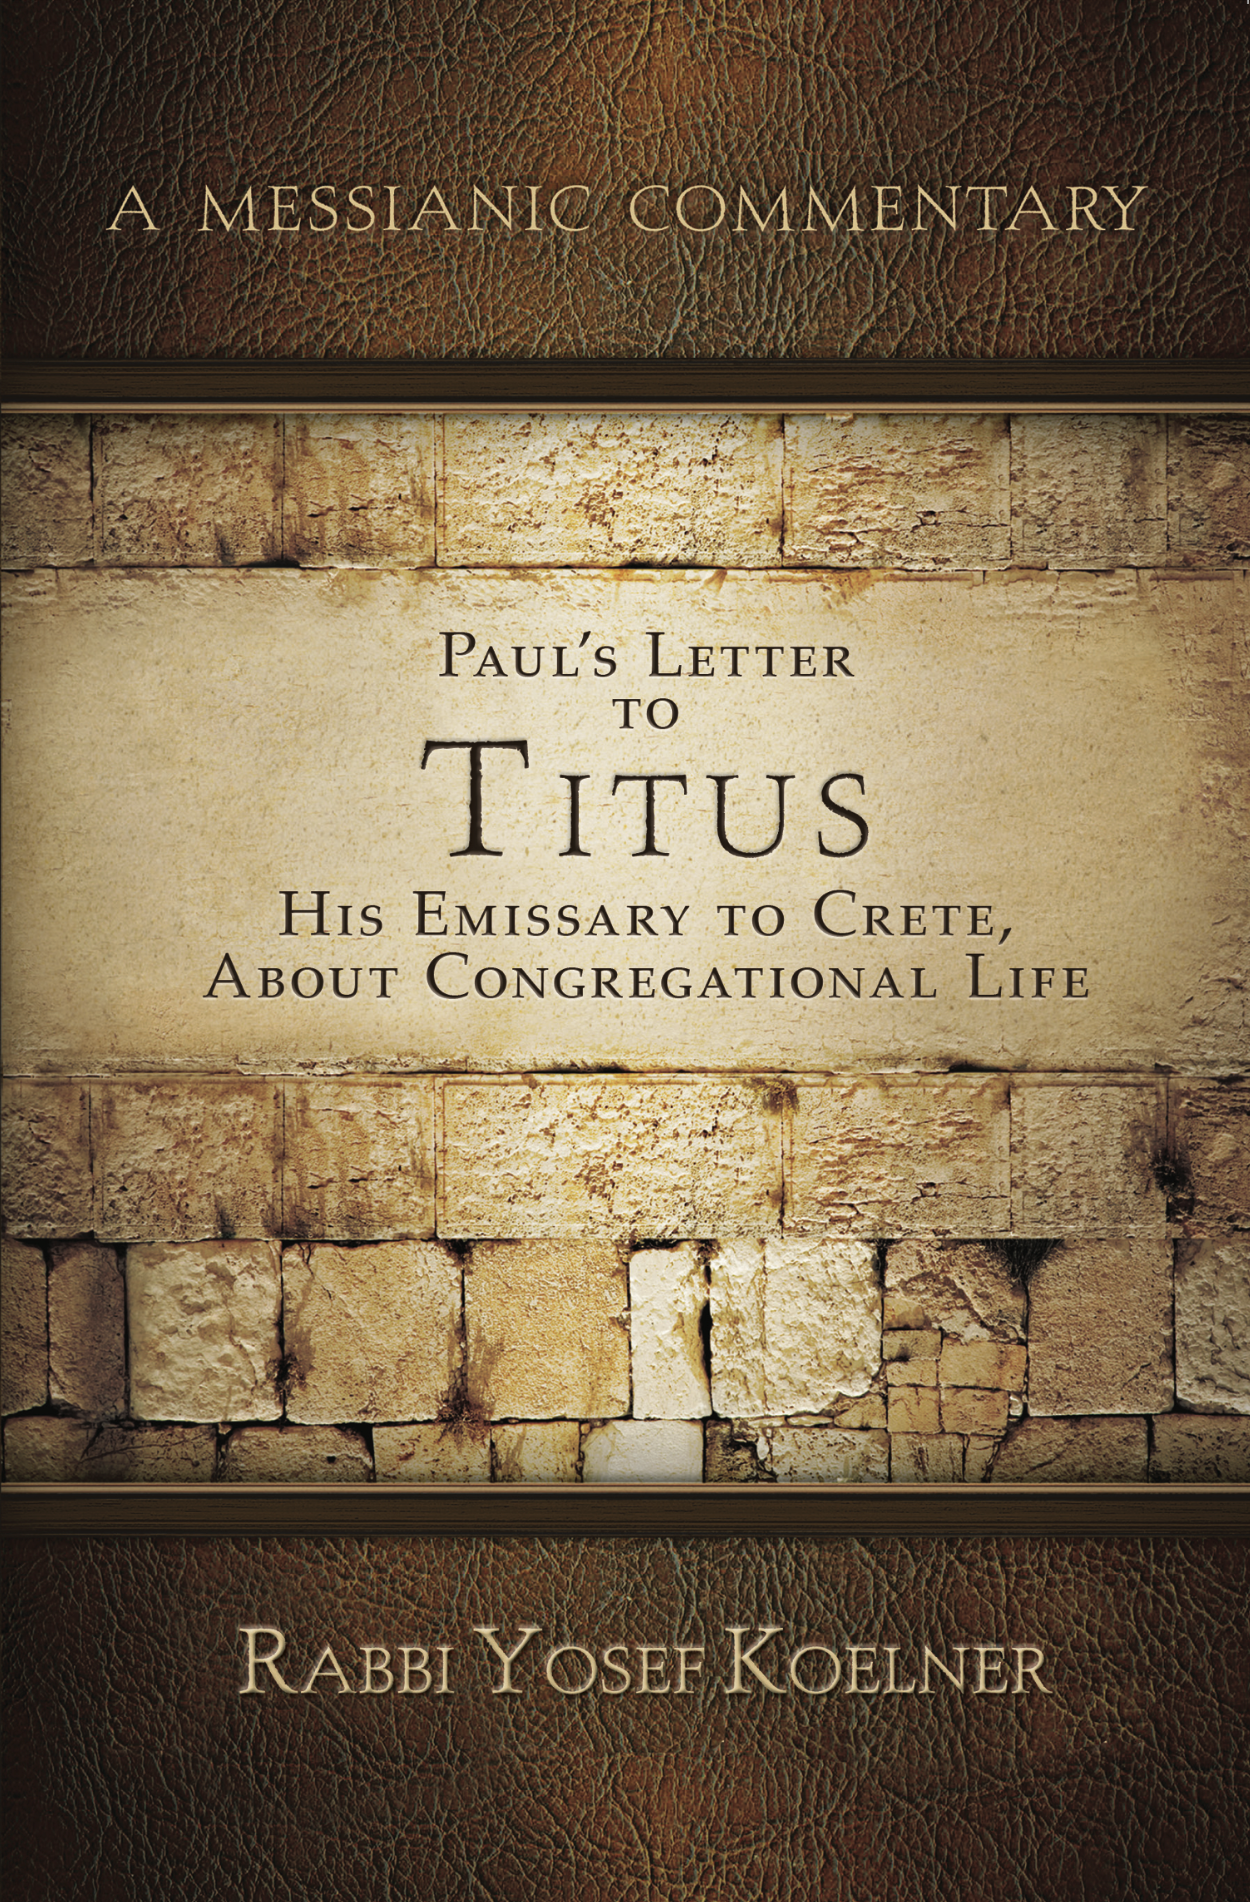 A Messianic Commentary - Paul's Letter to Titus: His Emissary to Crete, about Congregational Life by Rabbi Yosef Koelner